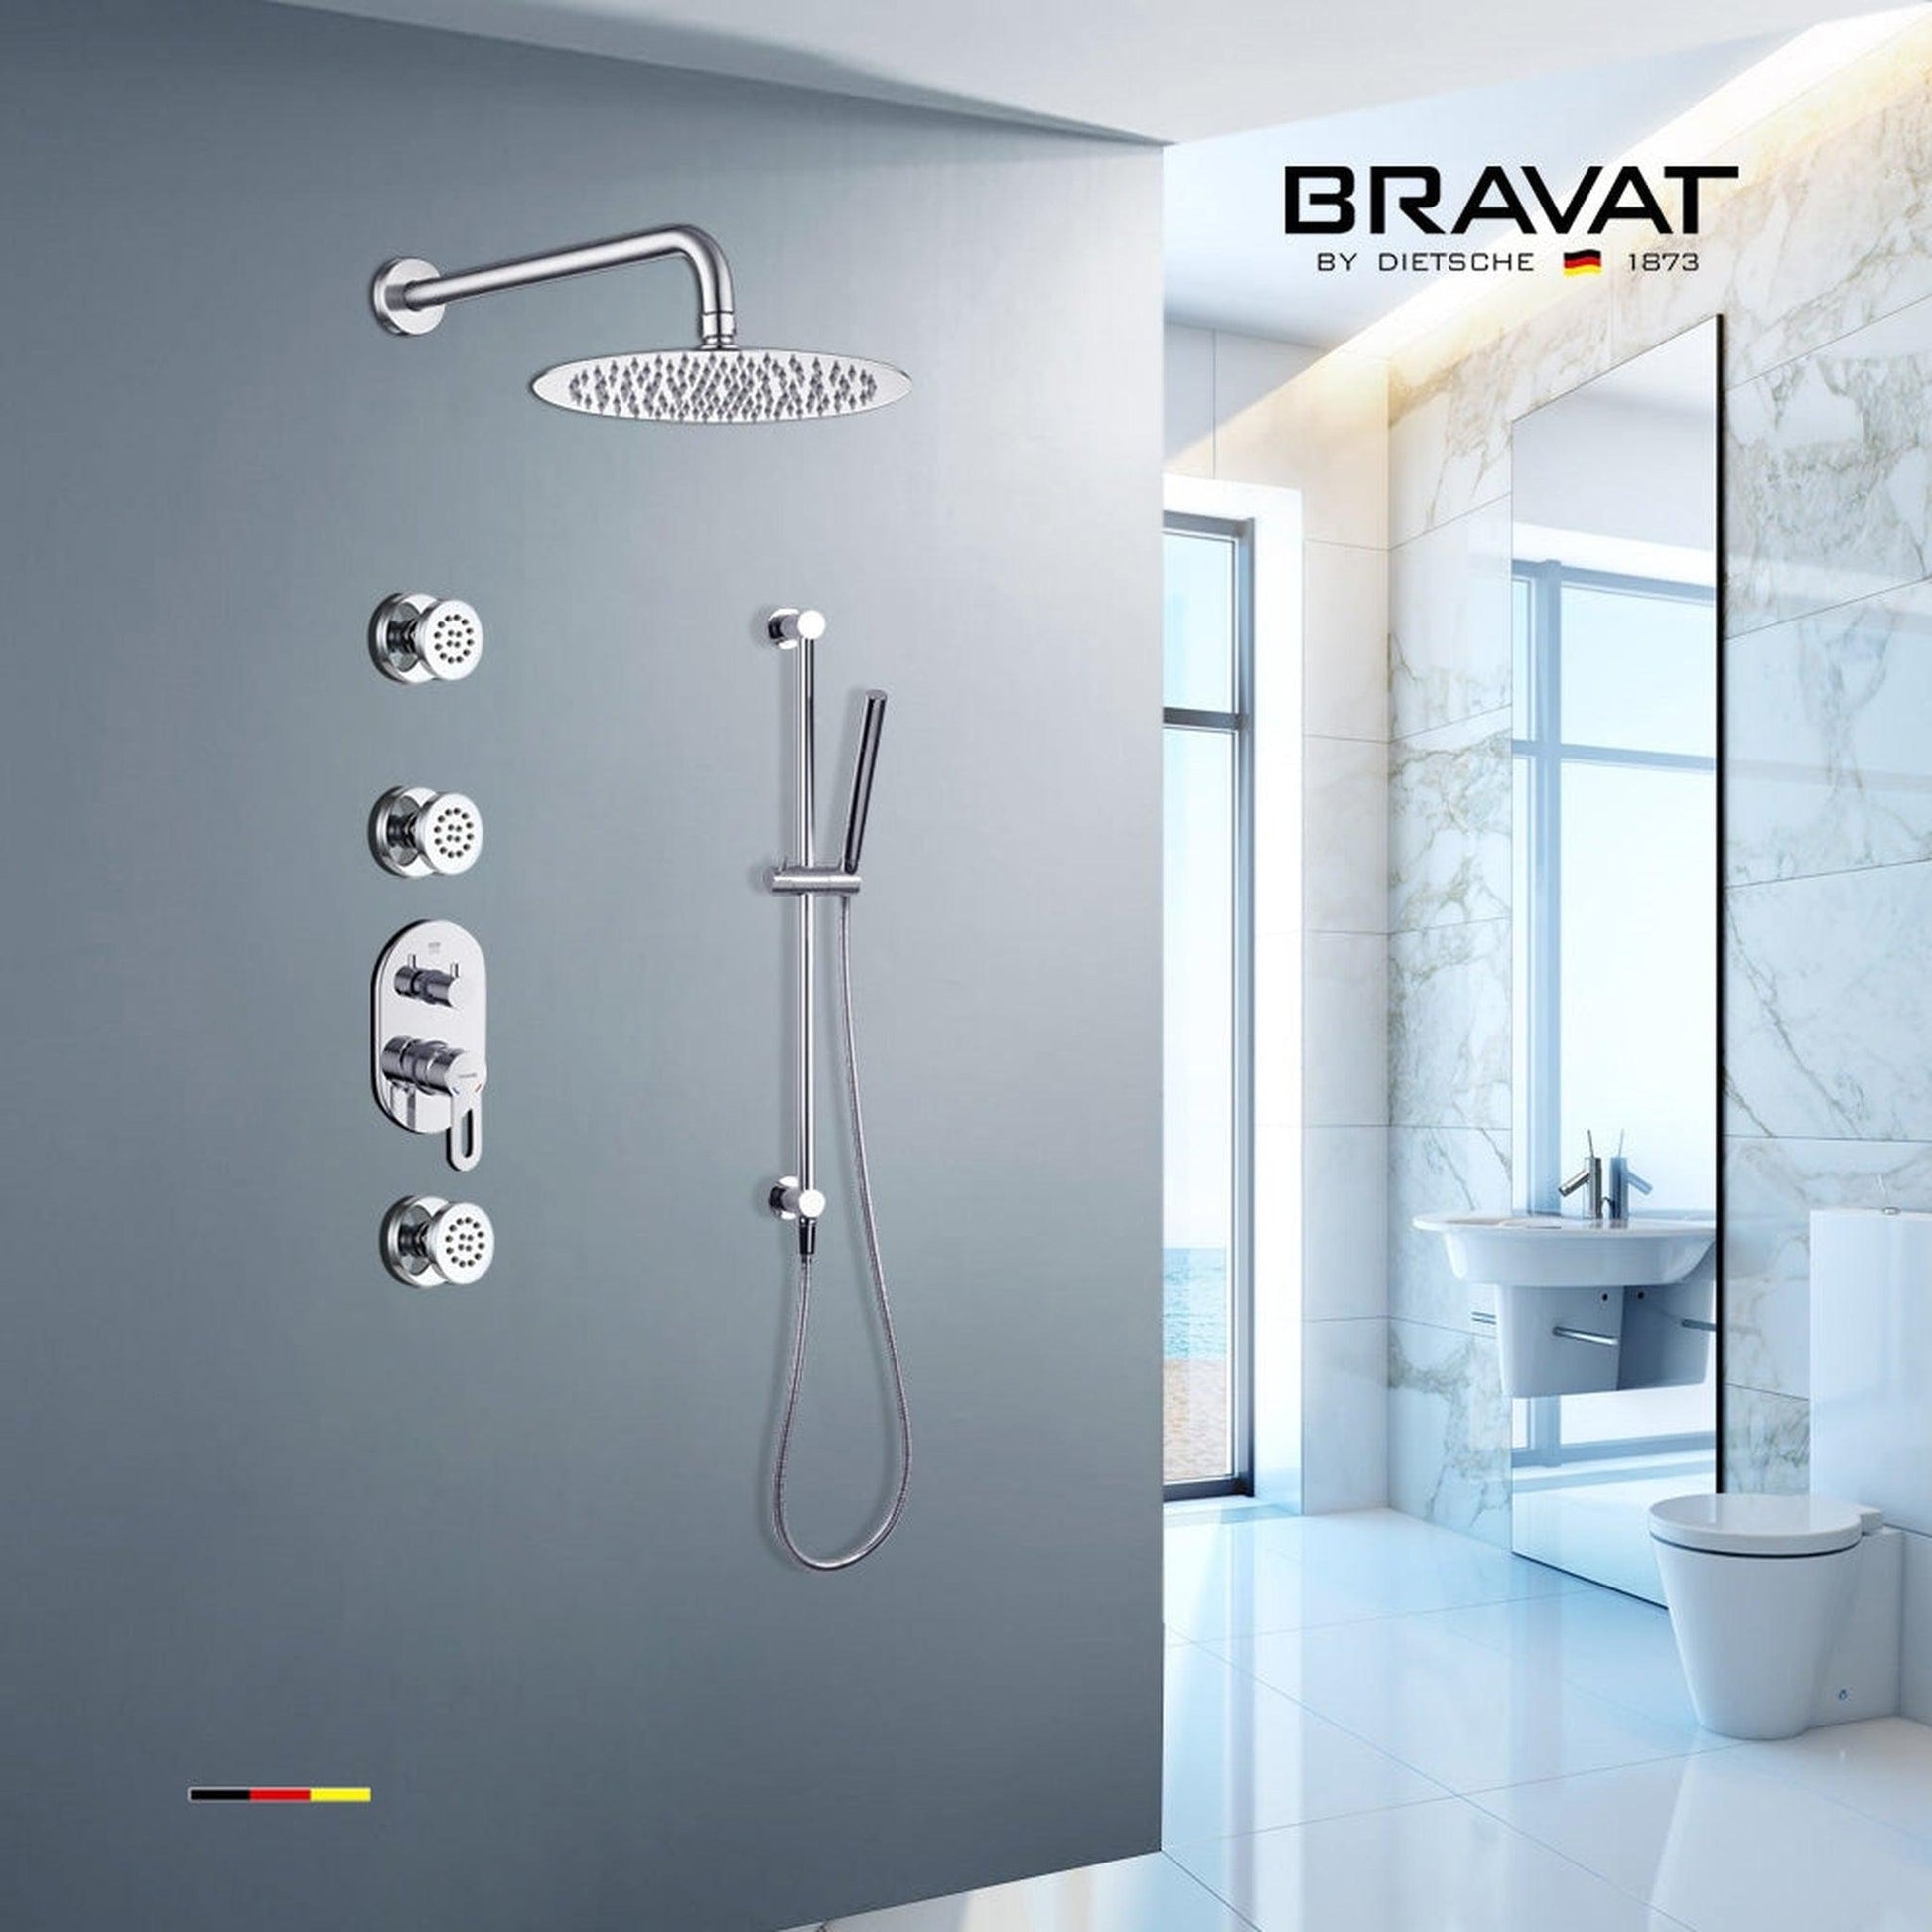 Fontana Bravat 12" Chrome Wall Mounted Thermostatic Rainfall Shower System With 3-Jet Body Sprays and Hand Shower